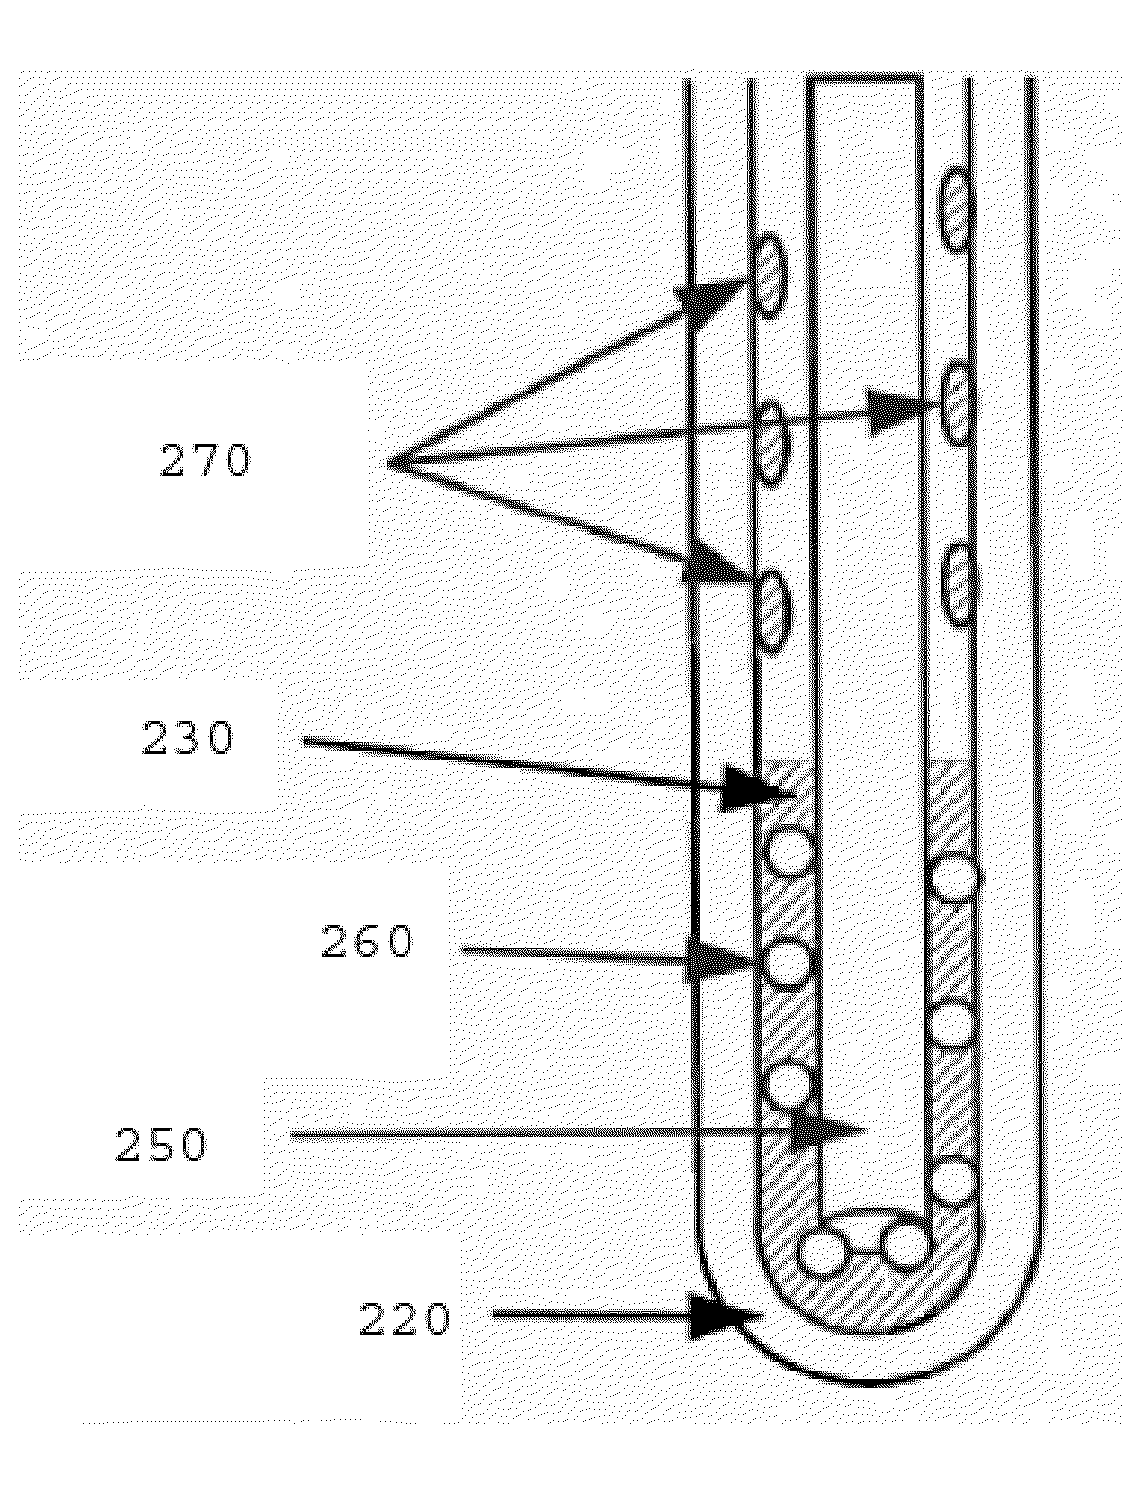 Liquid anodes and fuels for production of metals from their oxides by molten salt electrolysis with a solid electrolyte